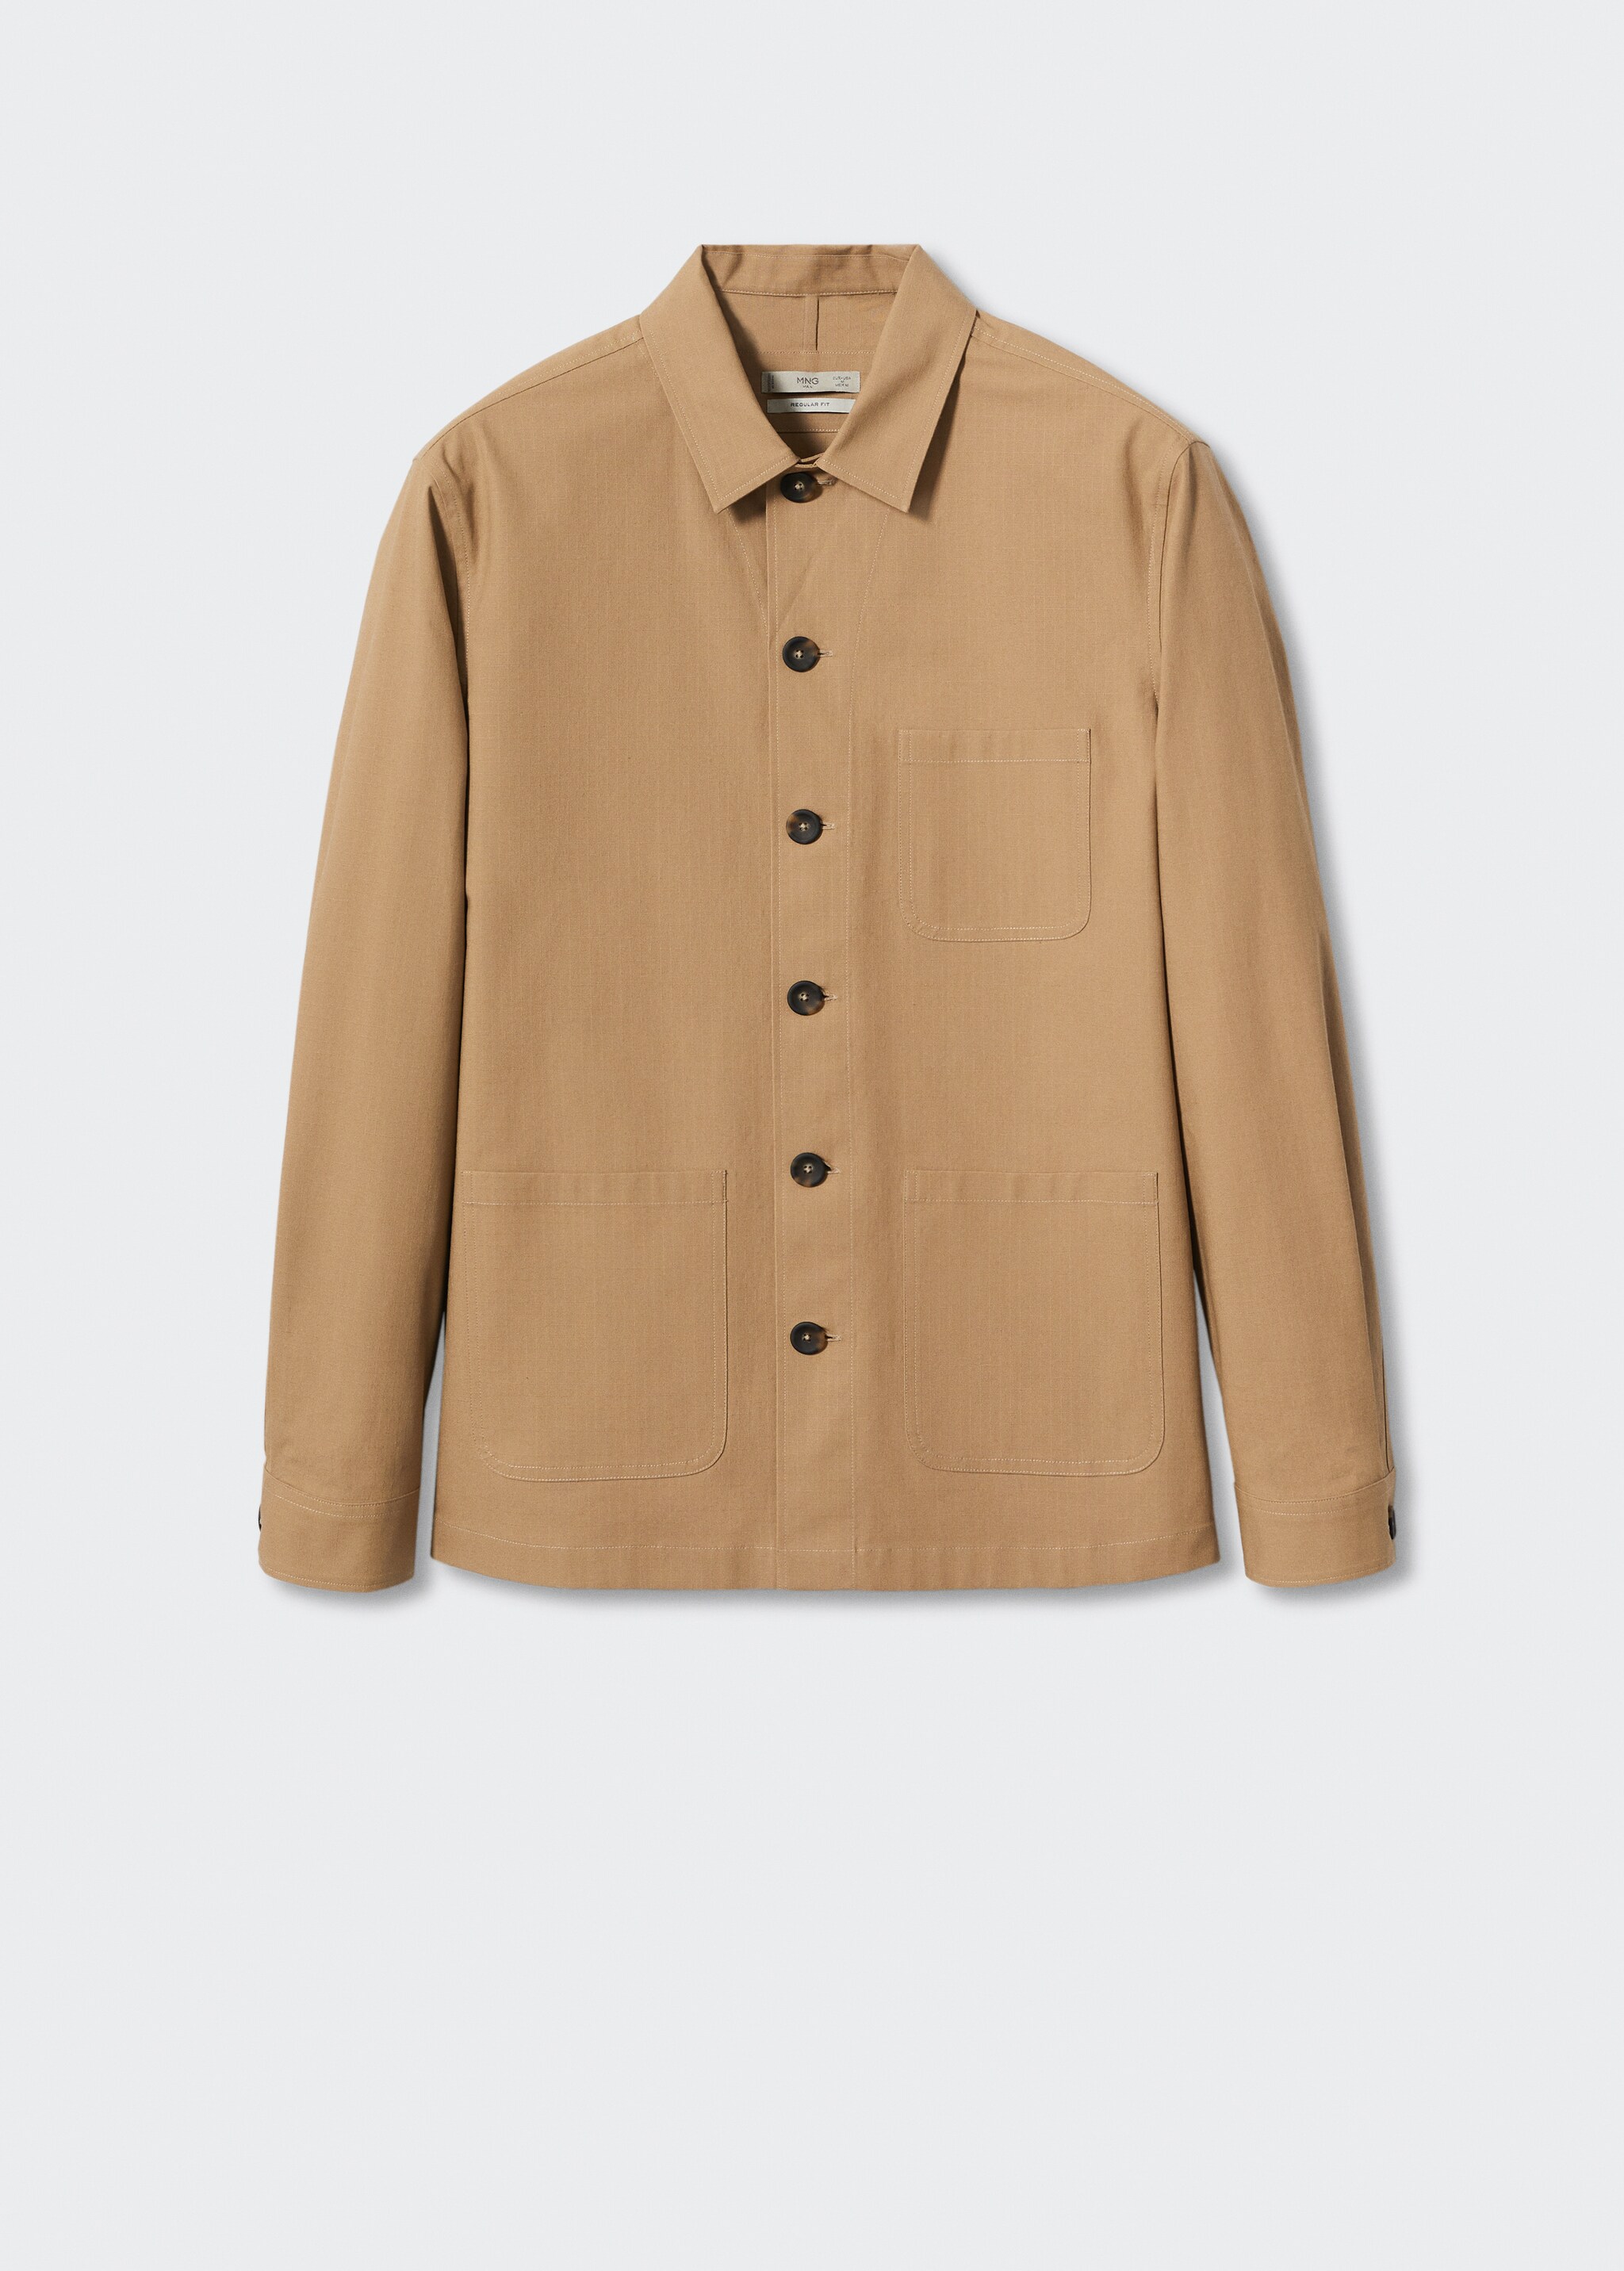 Worker cotton overshirt - Article without model